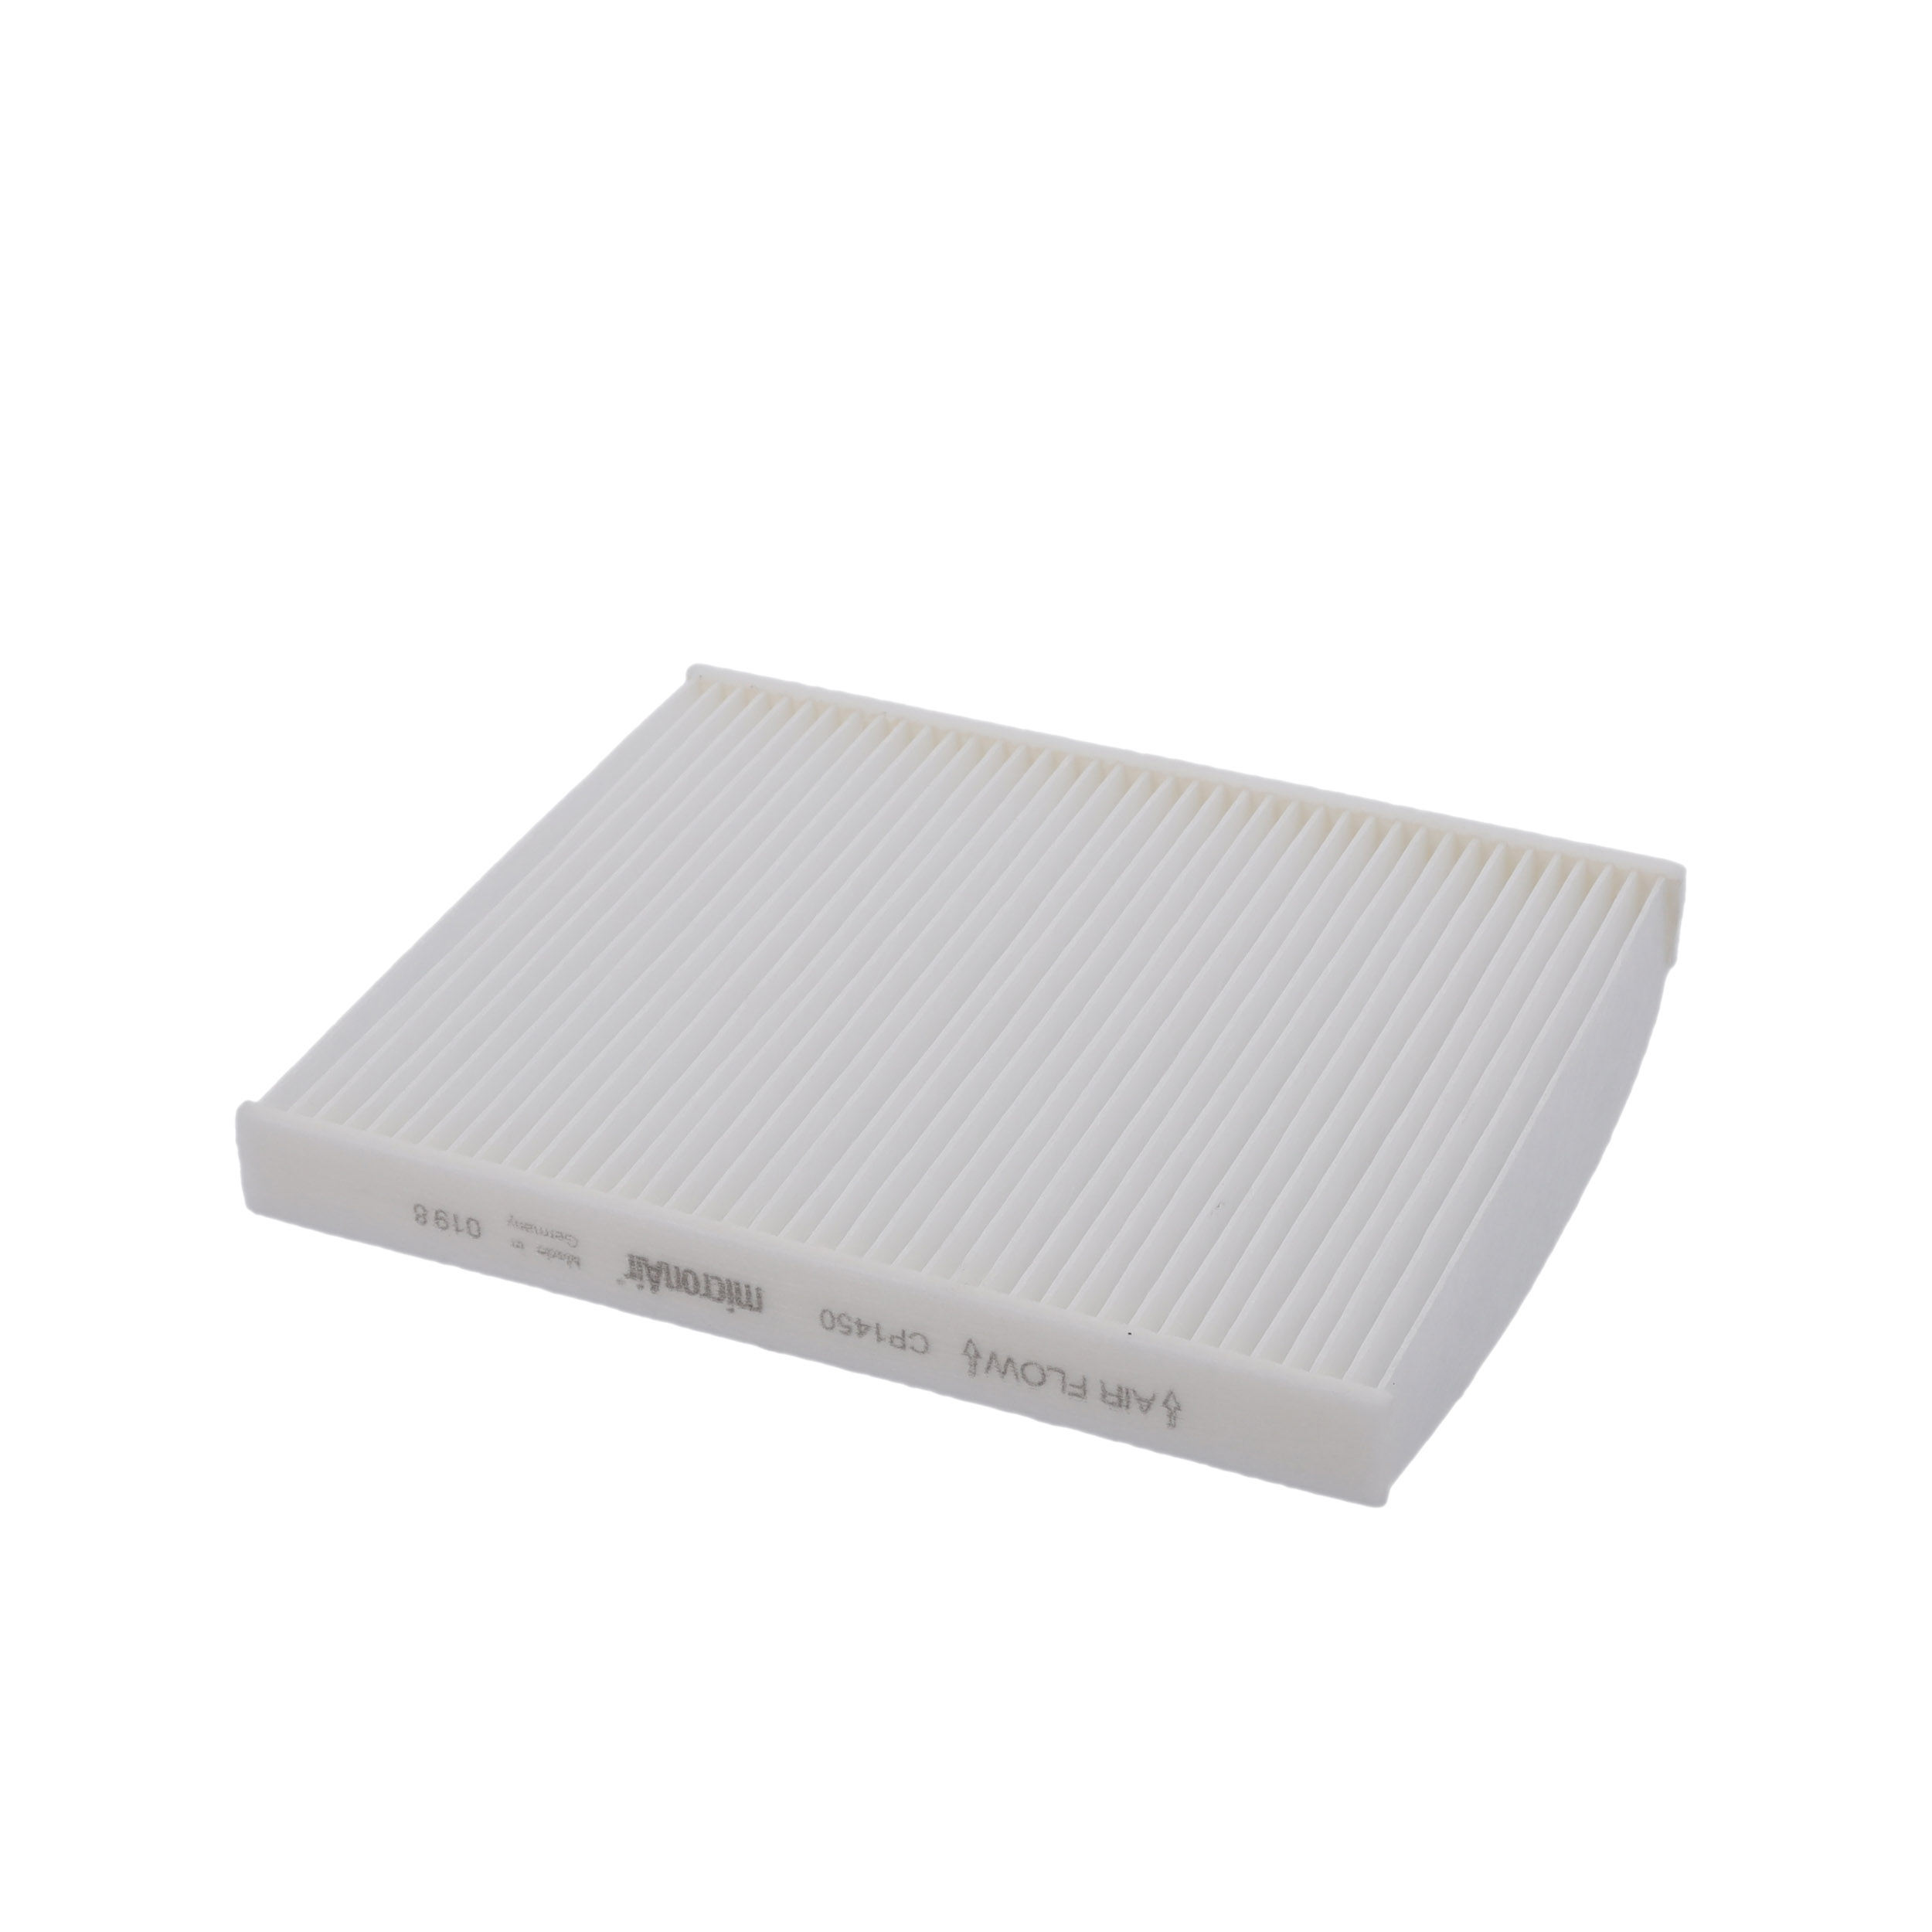 CORTECO Air Recirculation Filter, Particulate Filter, 198 mm x 170 mm x 20 mm Width: 170mm, Height: 20mm, Length: 198mm Cabin filter 80004406 buy